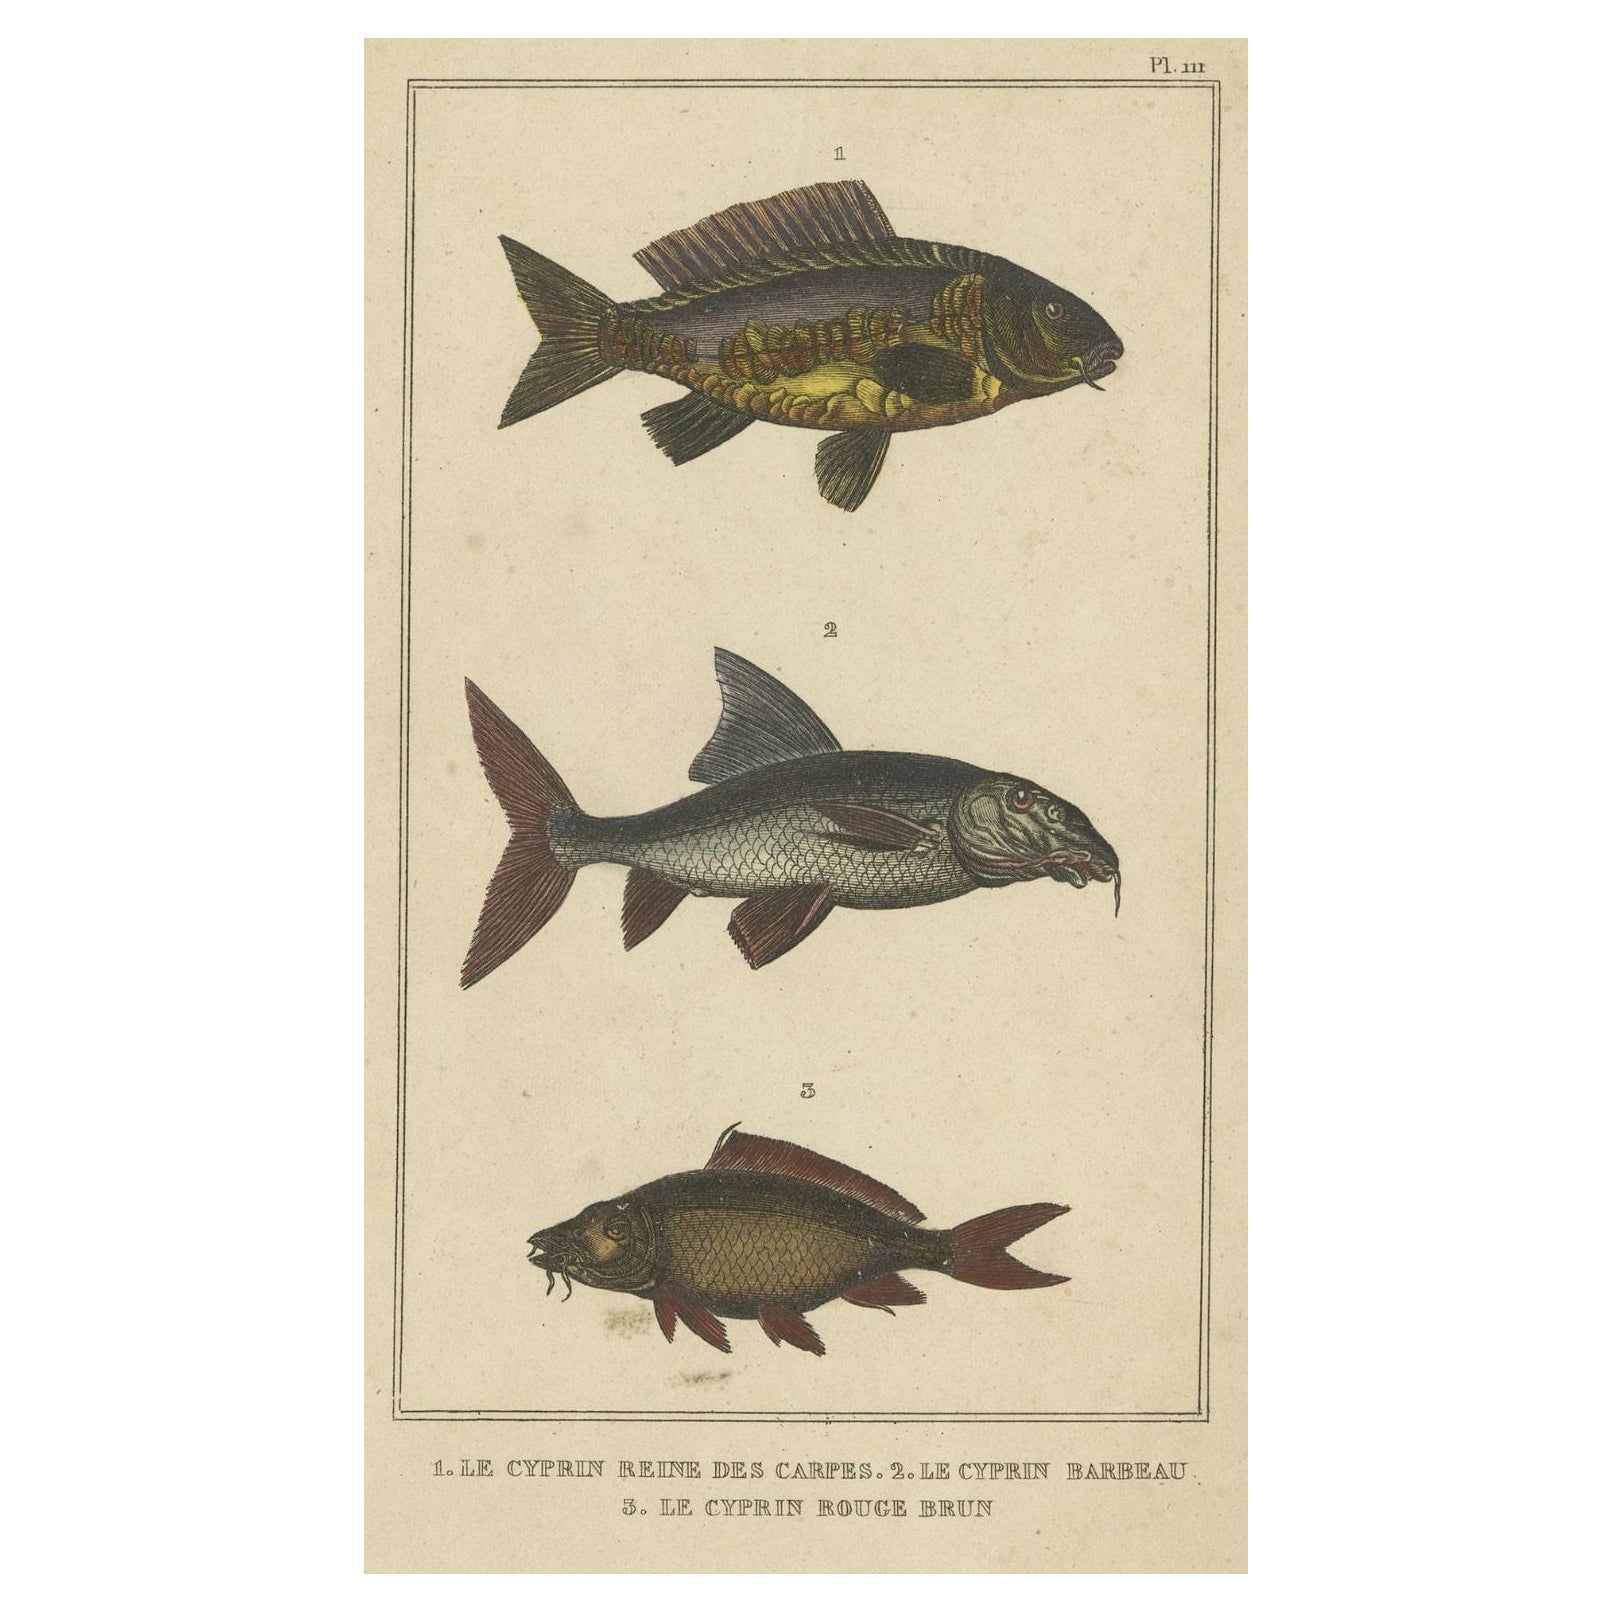 Antique Print of the Barbel Fish and other Fish Species, 1844